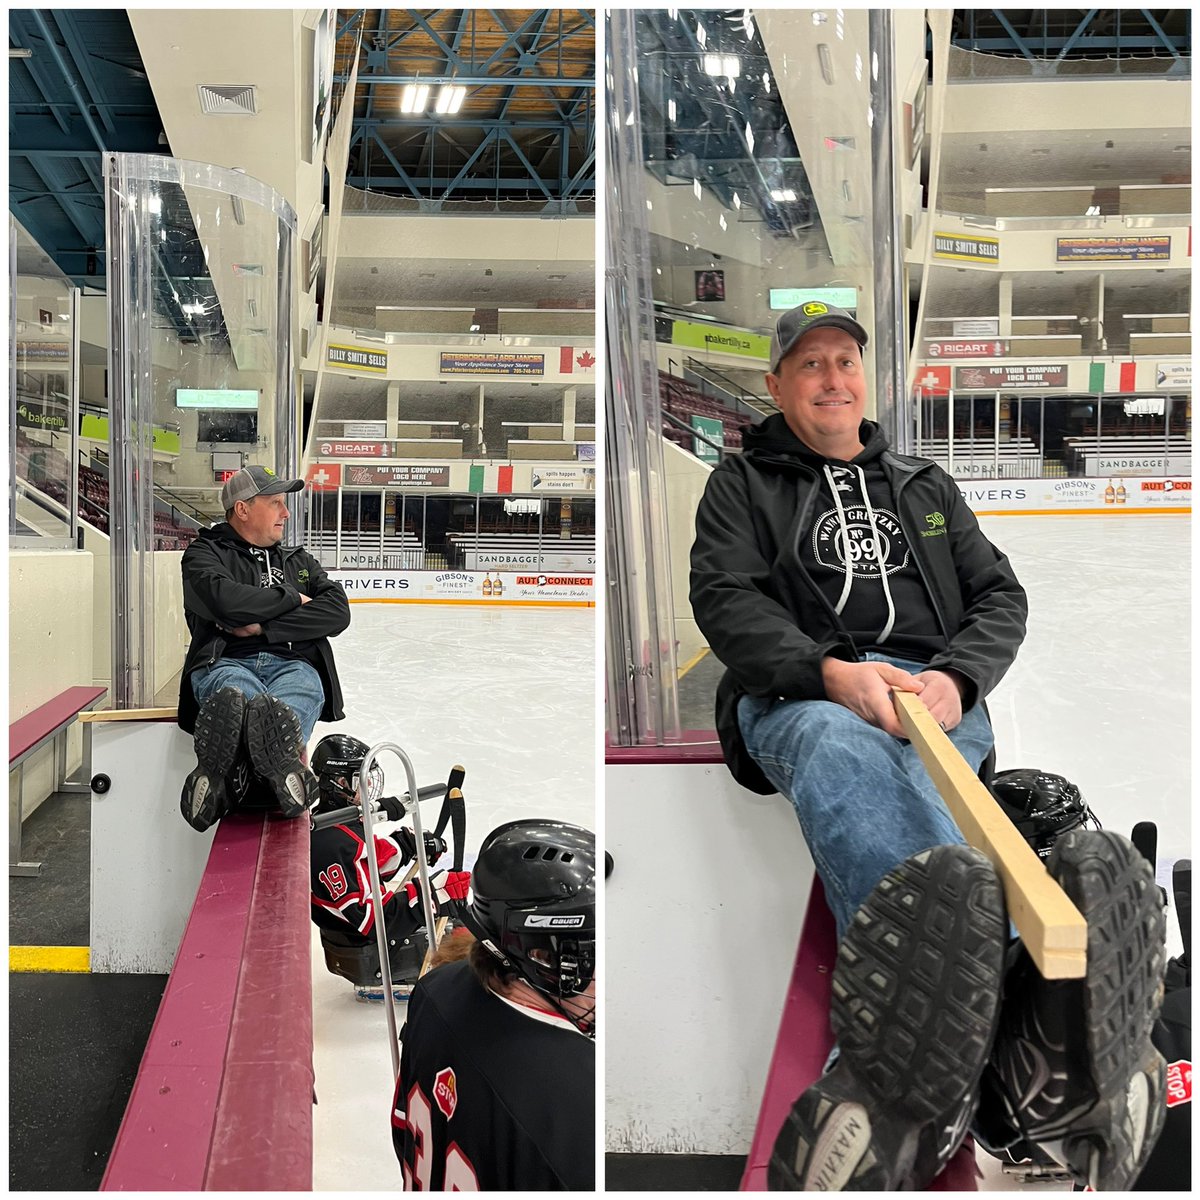 Coach @BradNimijohn had a comfy seat  at our Sledgehockey game today